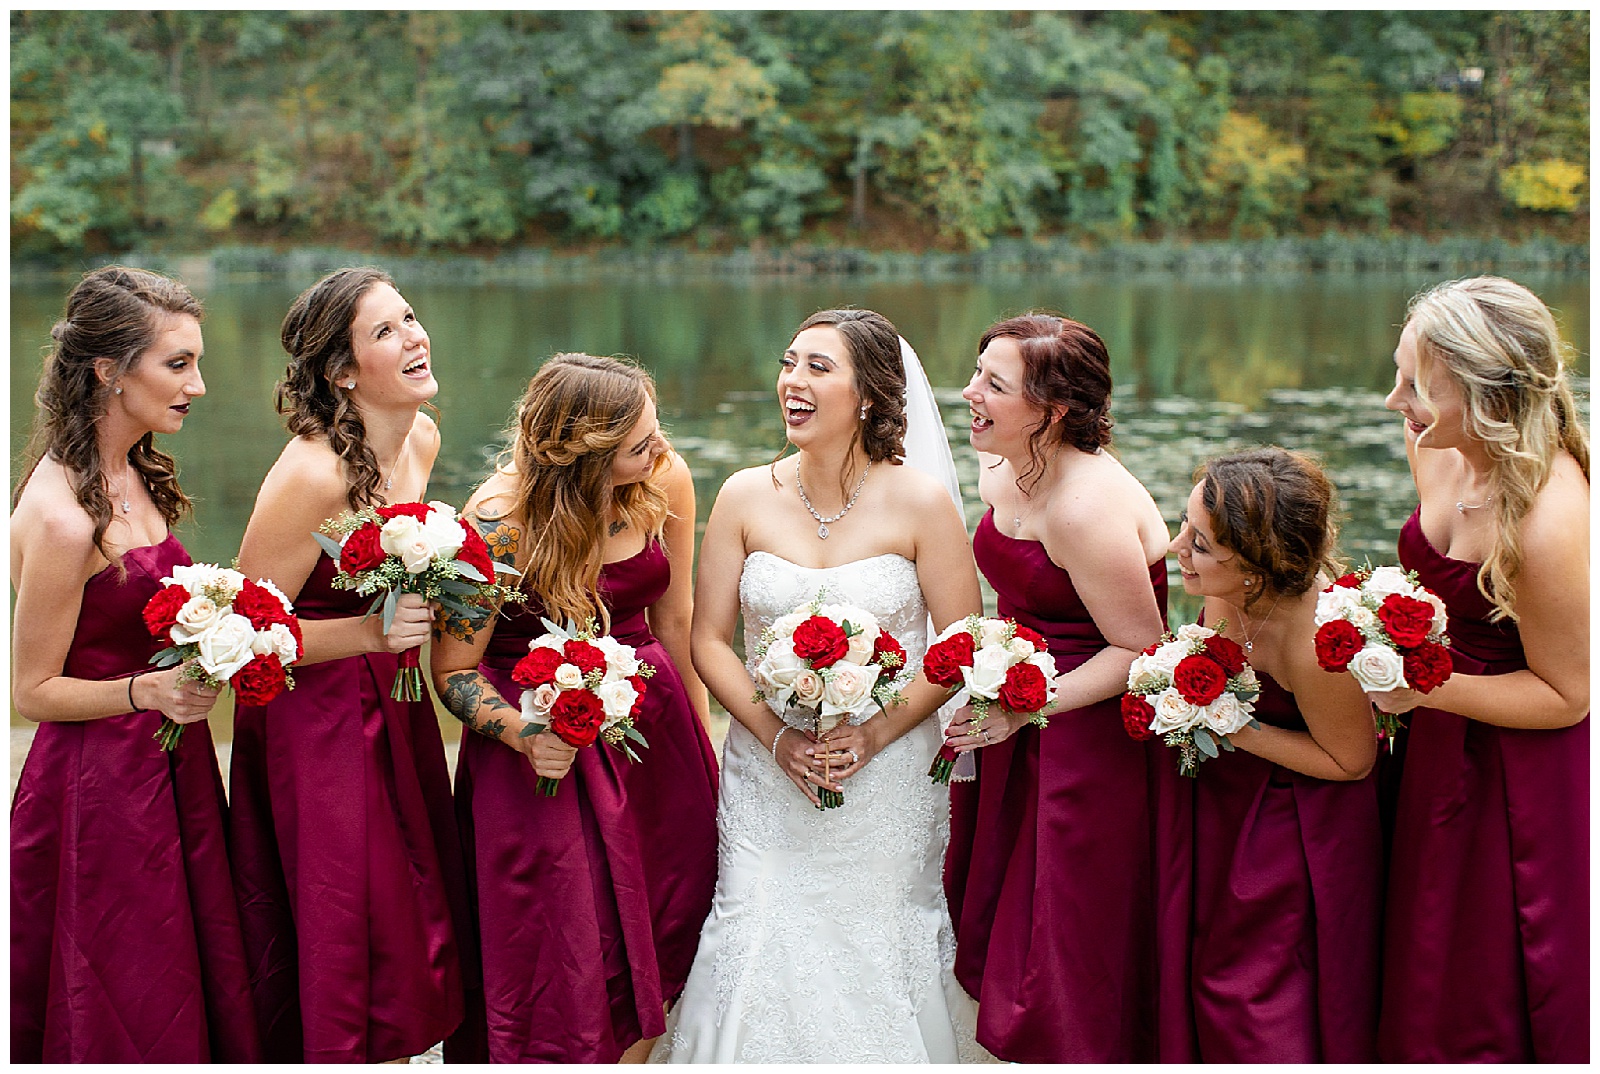 Bride and bridesmaids in burgundy dresses